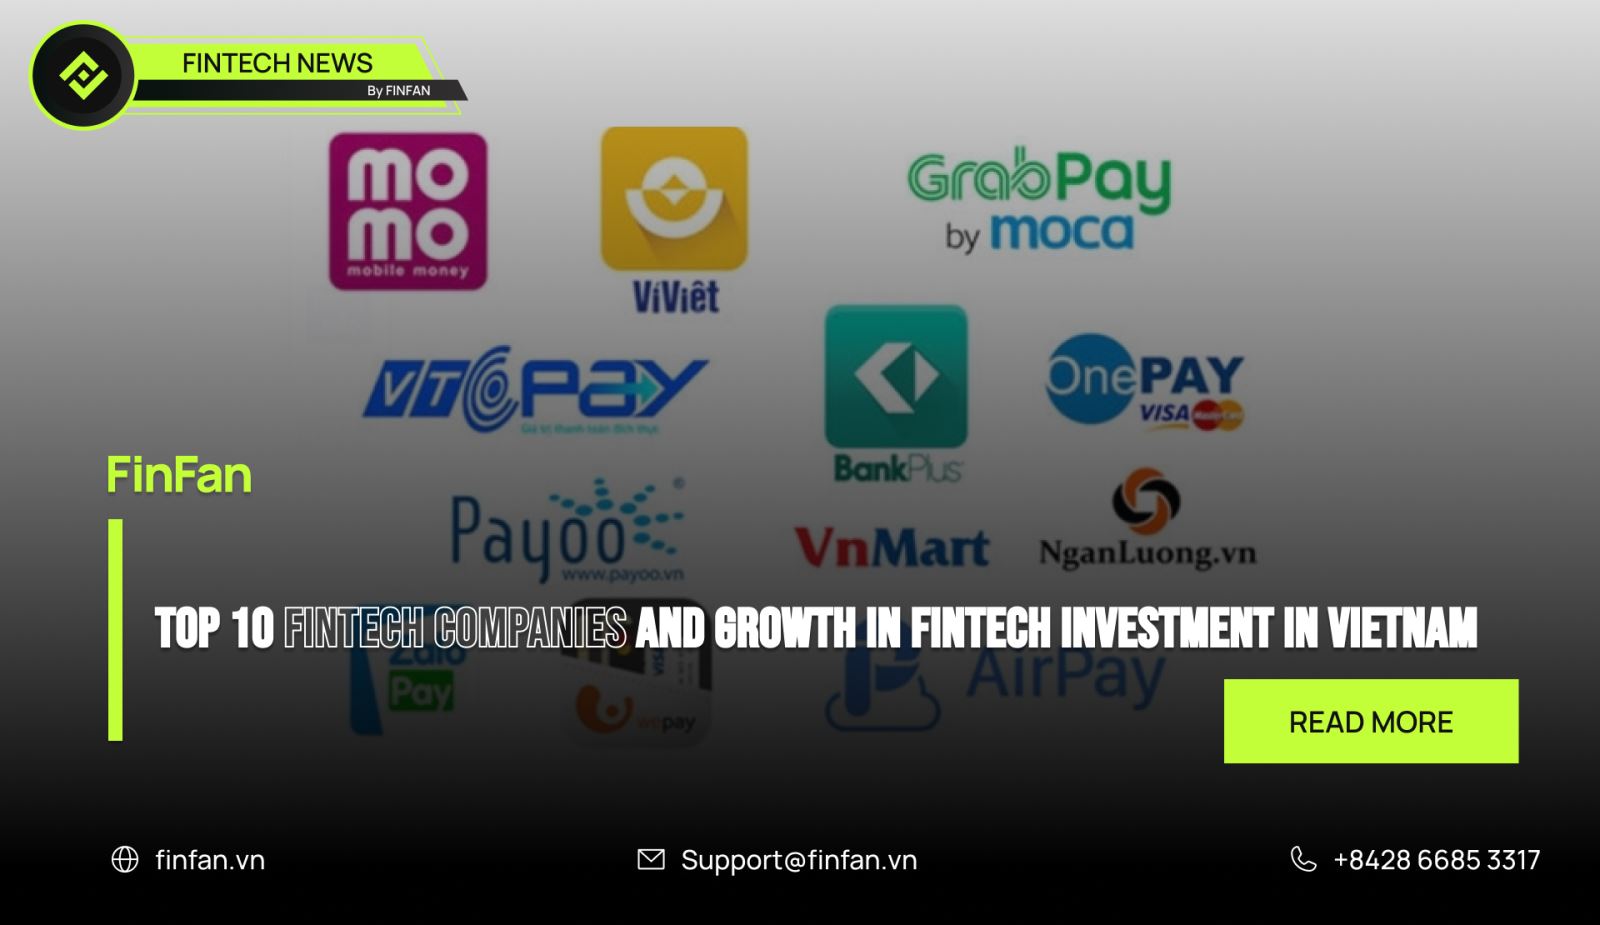 Top 10 fintech companies and growth in fintech investment in Vietnam